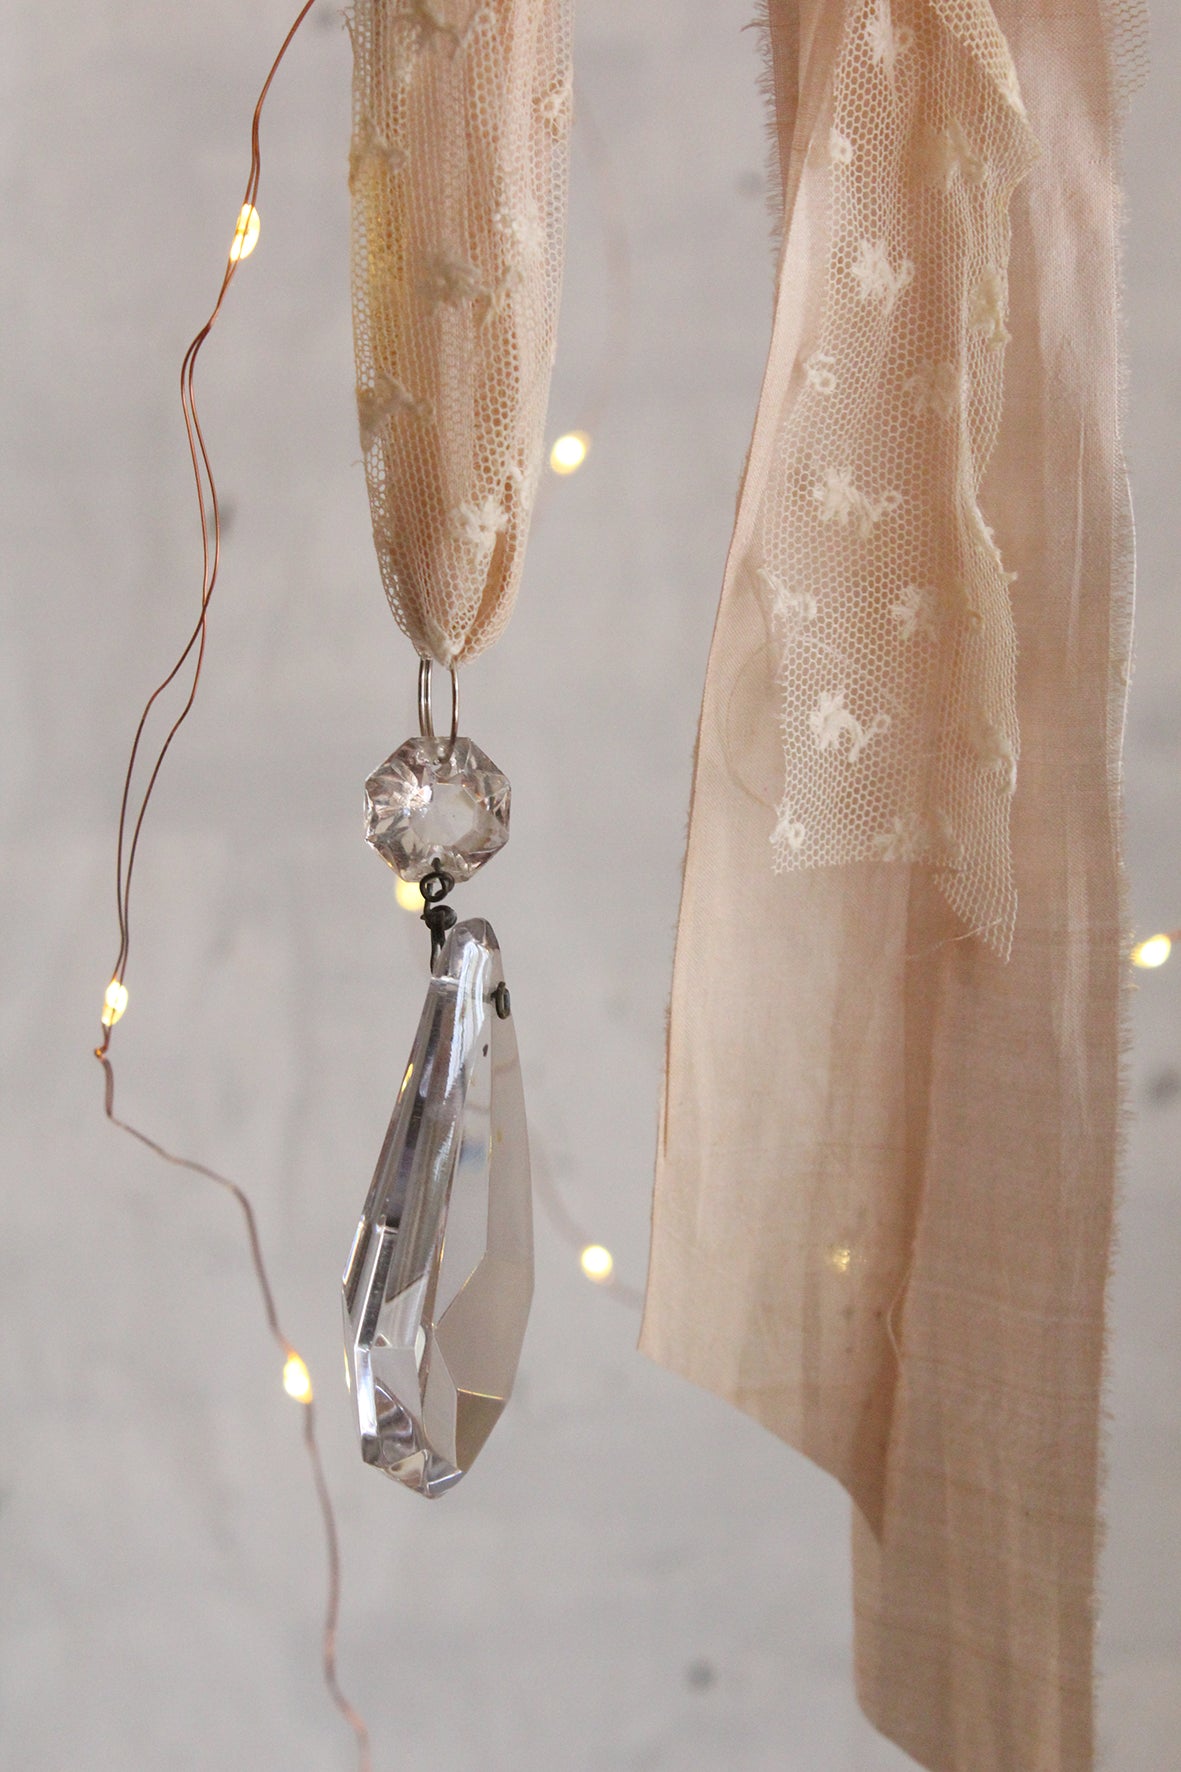 Antique French Glass Chandelier Drop With An Antique Lace & Soft Blush Silk Hanger